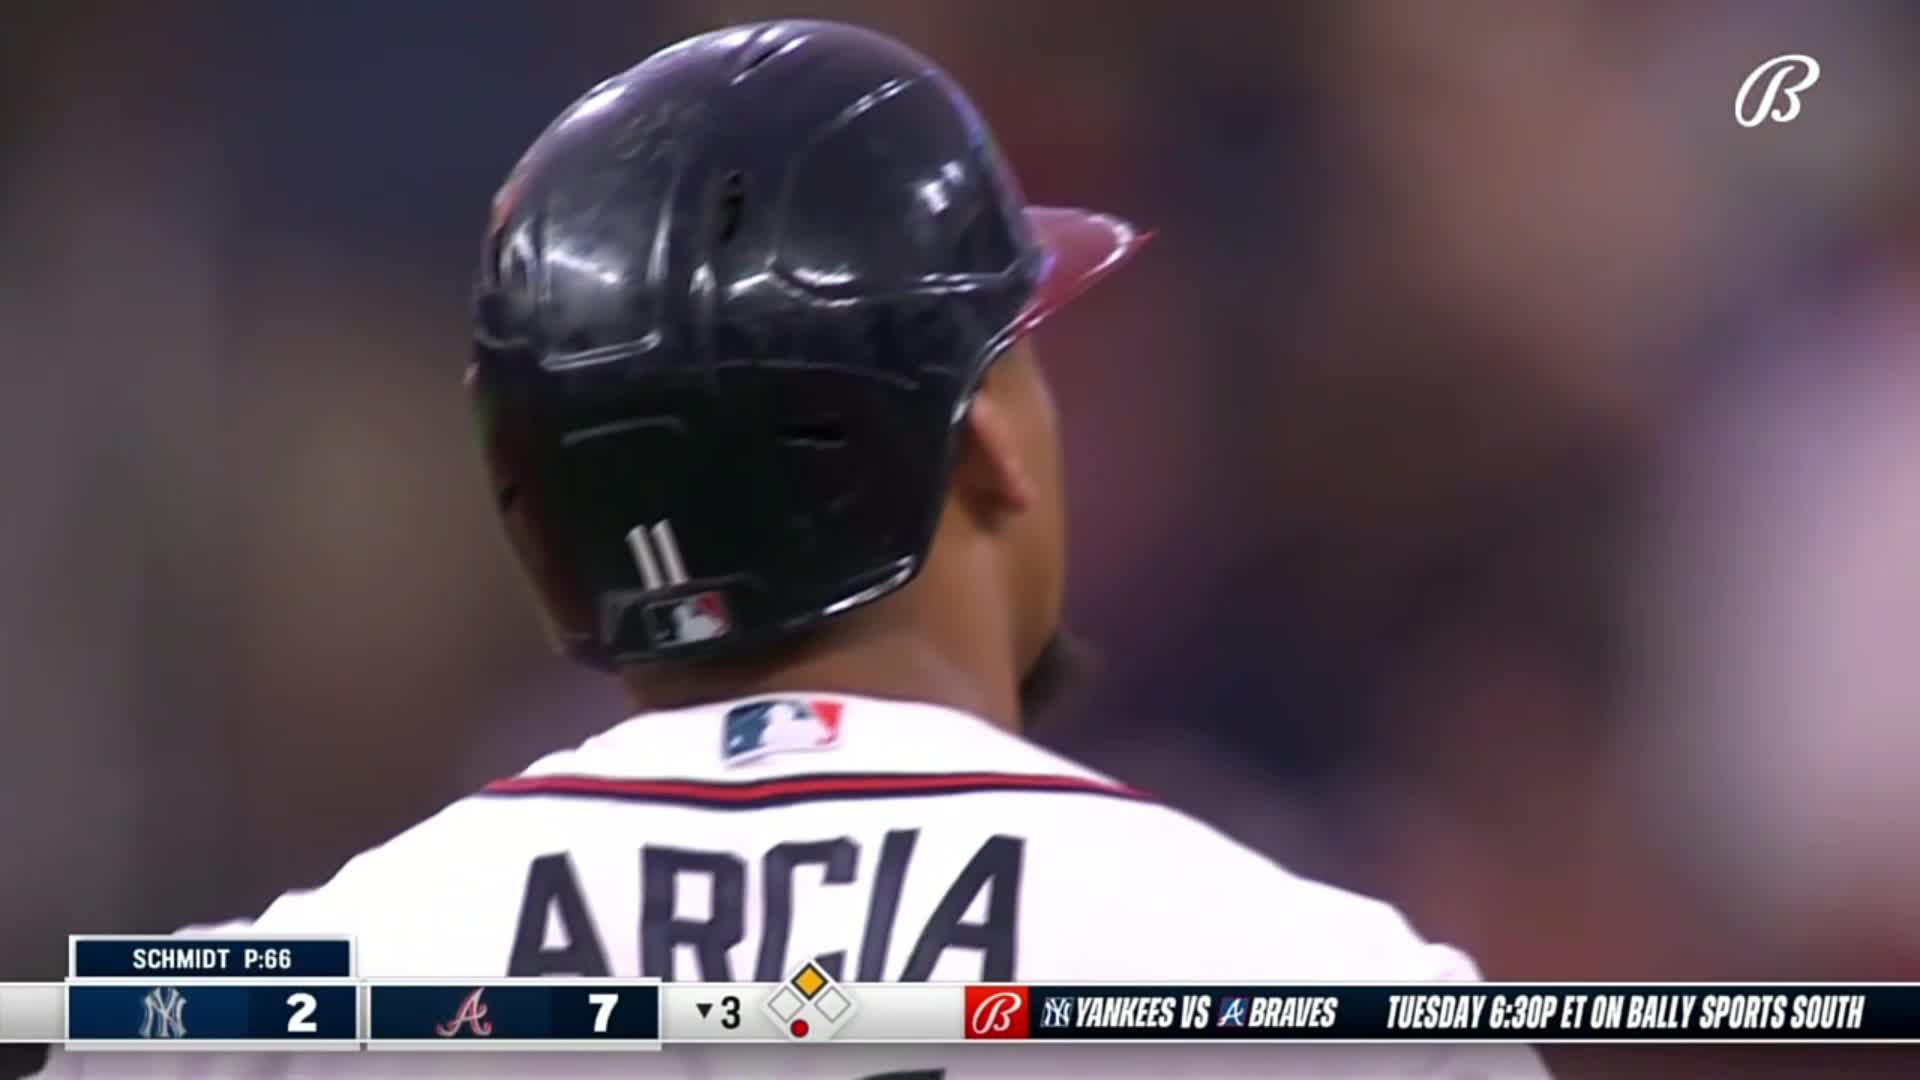 [Highlight] Harrison Bader has Eddie Rosario dead to rights, but Kyle  Higashioka drops the ball as the Braves take a 7-2 lead over the Yankees in  the third inning. : r/baseball